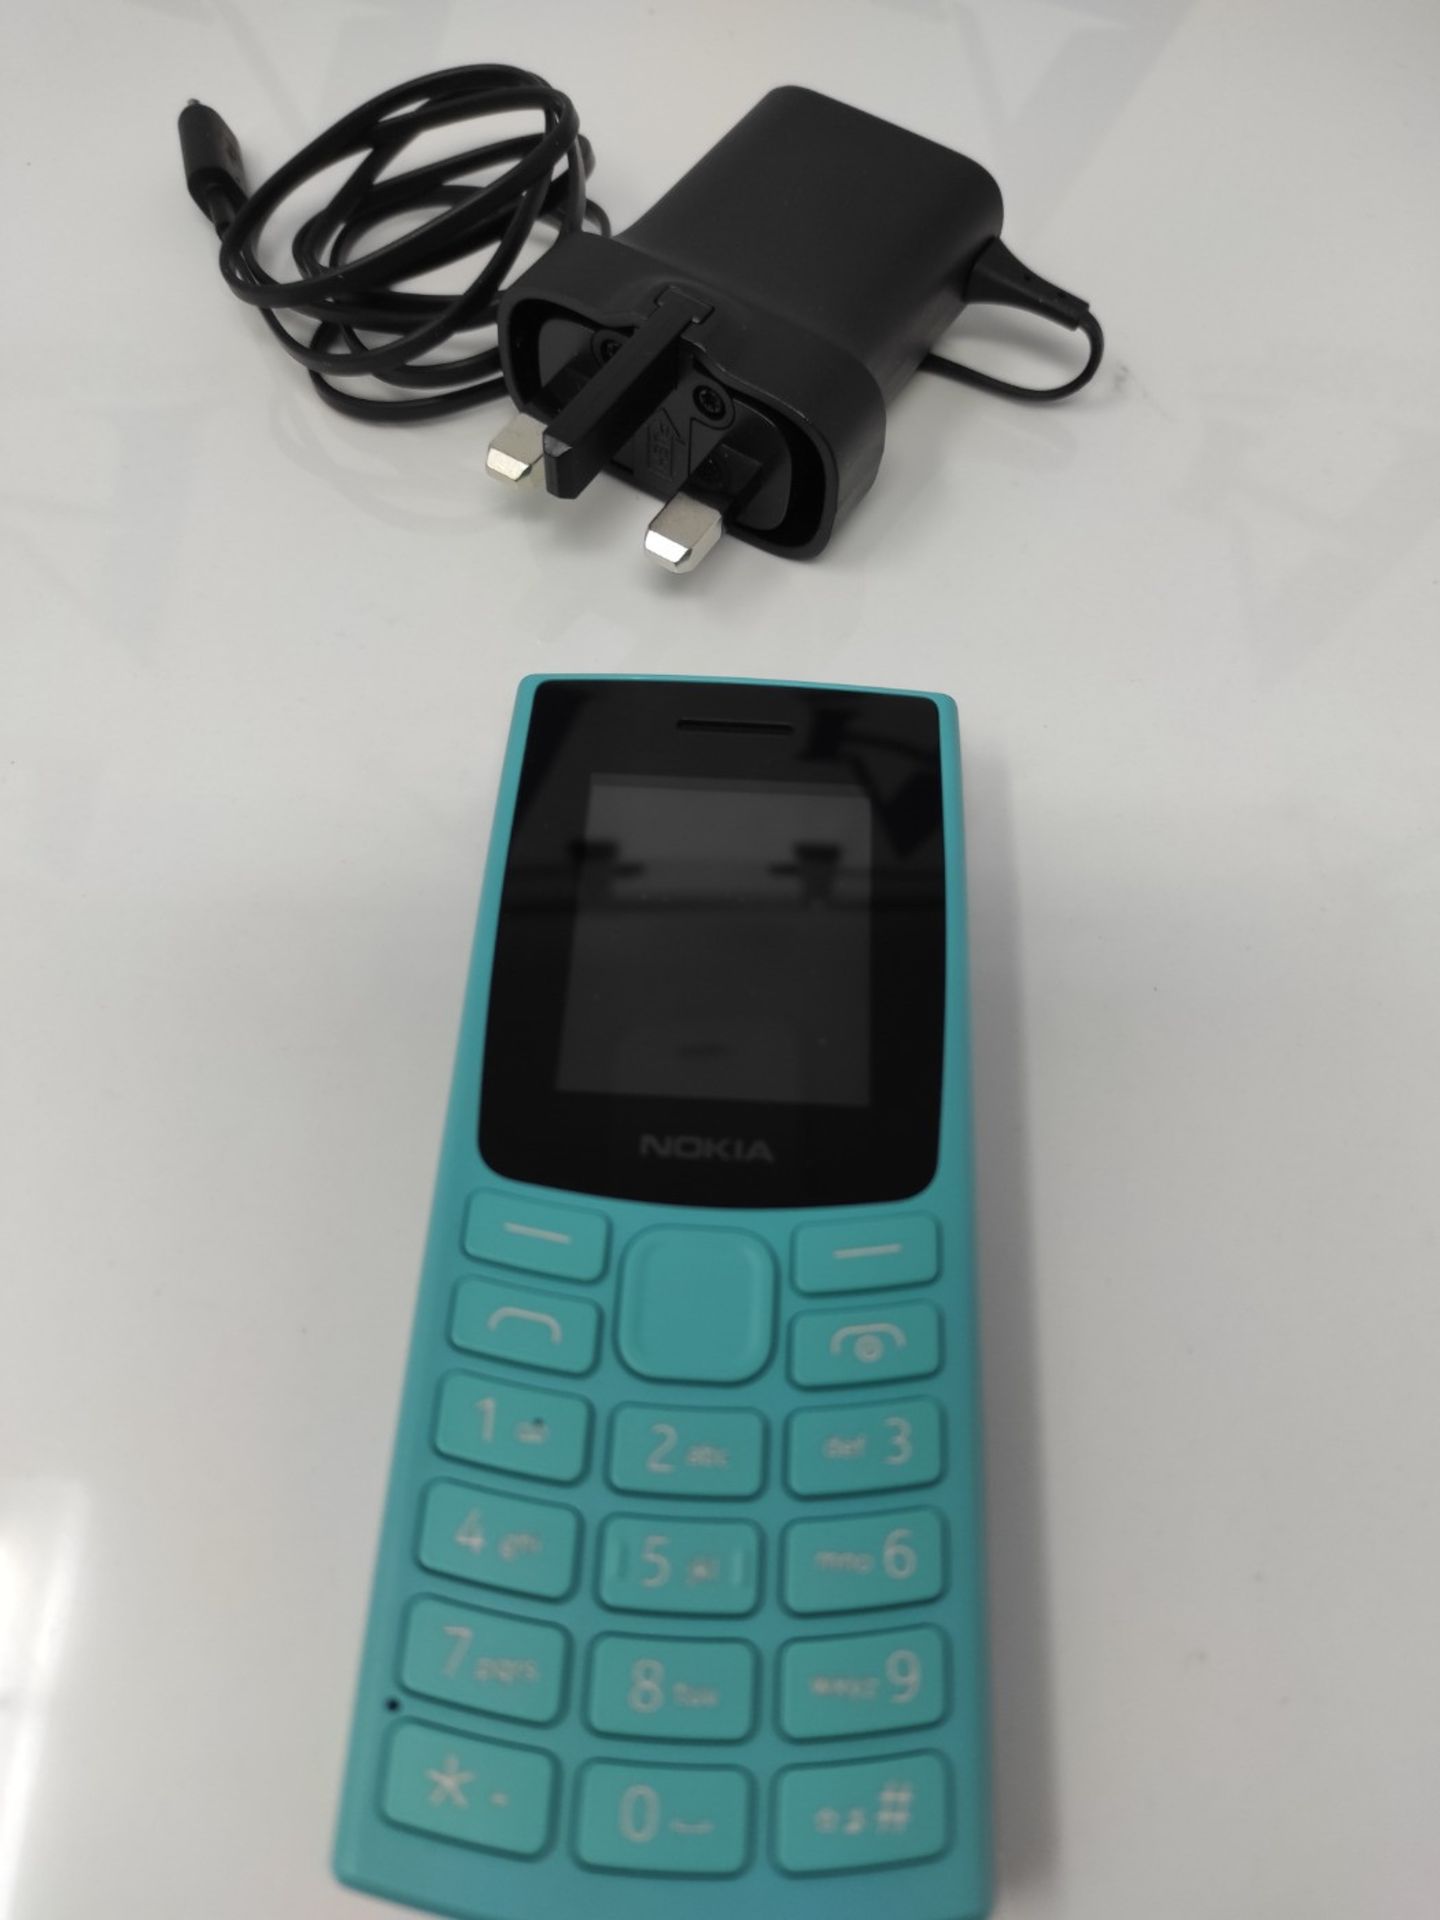 Nokia 105 2G Feature Phone with long-lasting battery, 12 hours of talk-time, wireless - Image 2 of 3